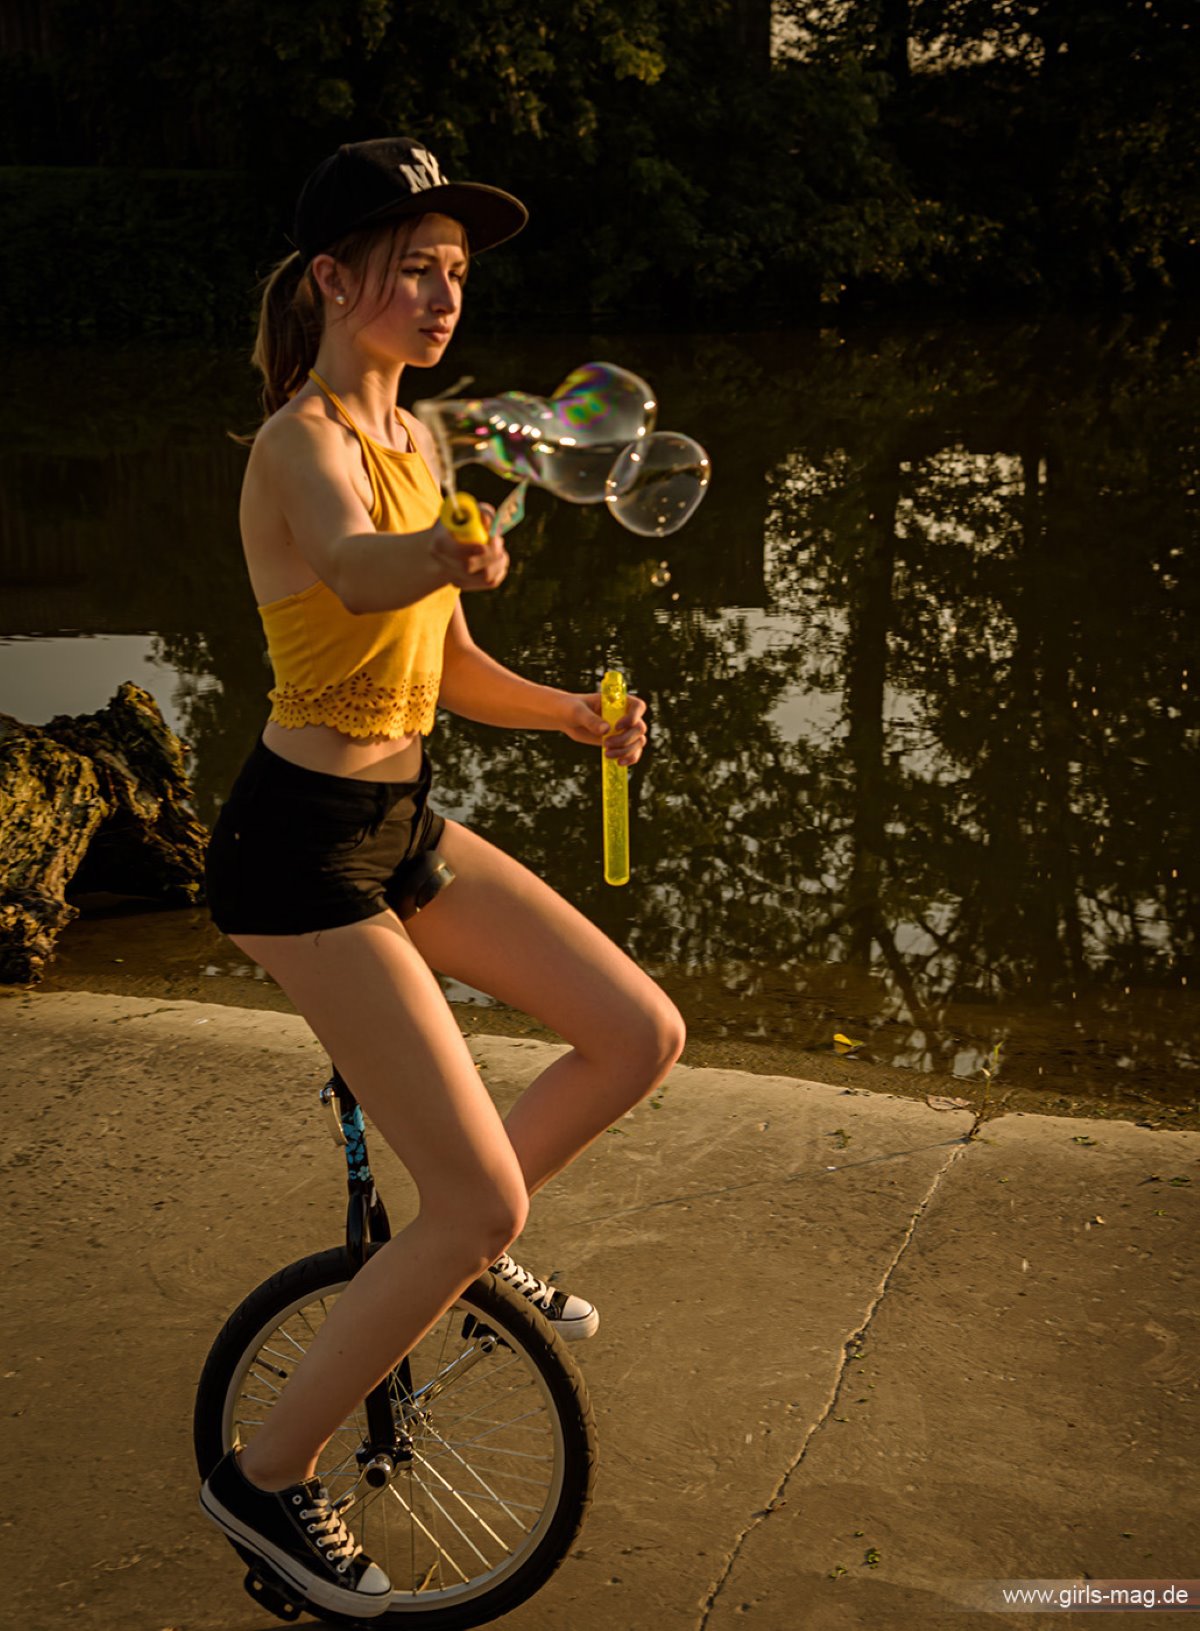 Girls Mag Annika Bubbles on a Unicycle 0091 0827321270.jpg